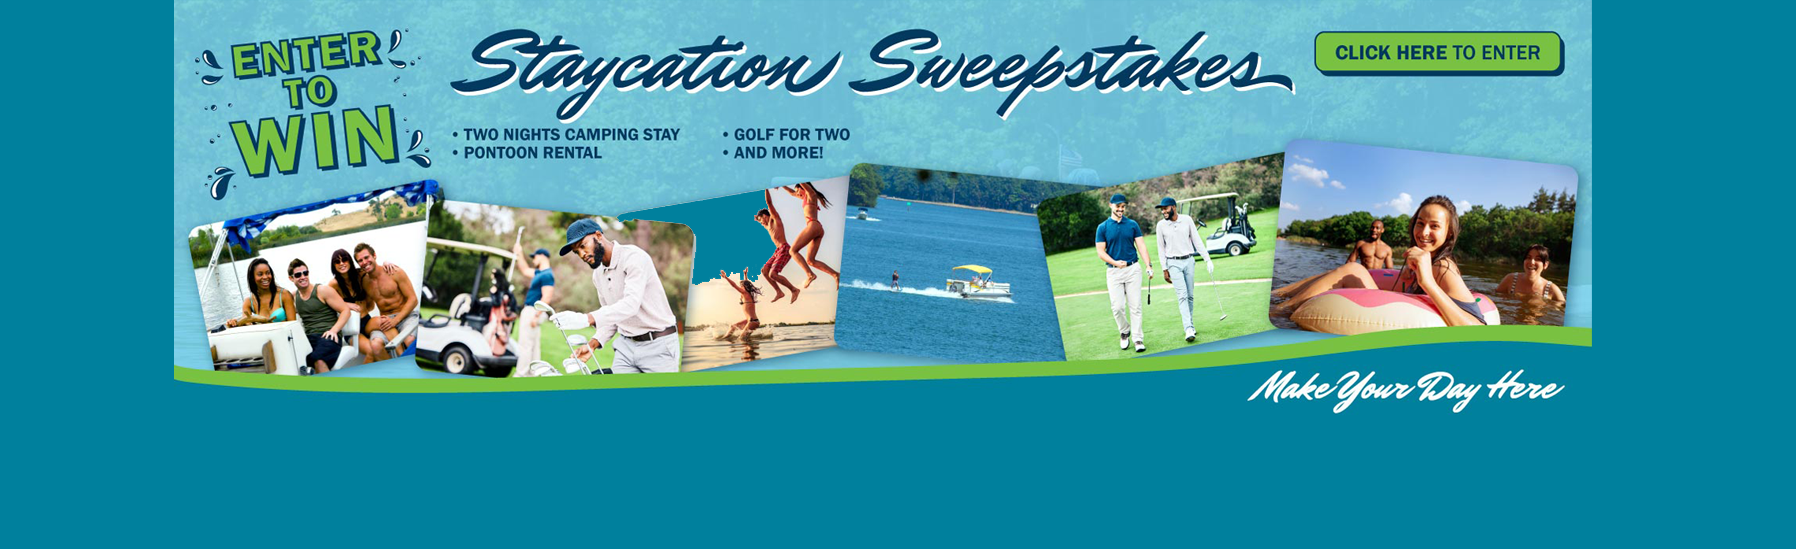 Staycation-Sweepstakes.png